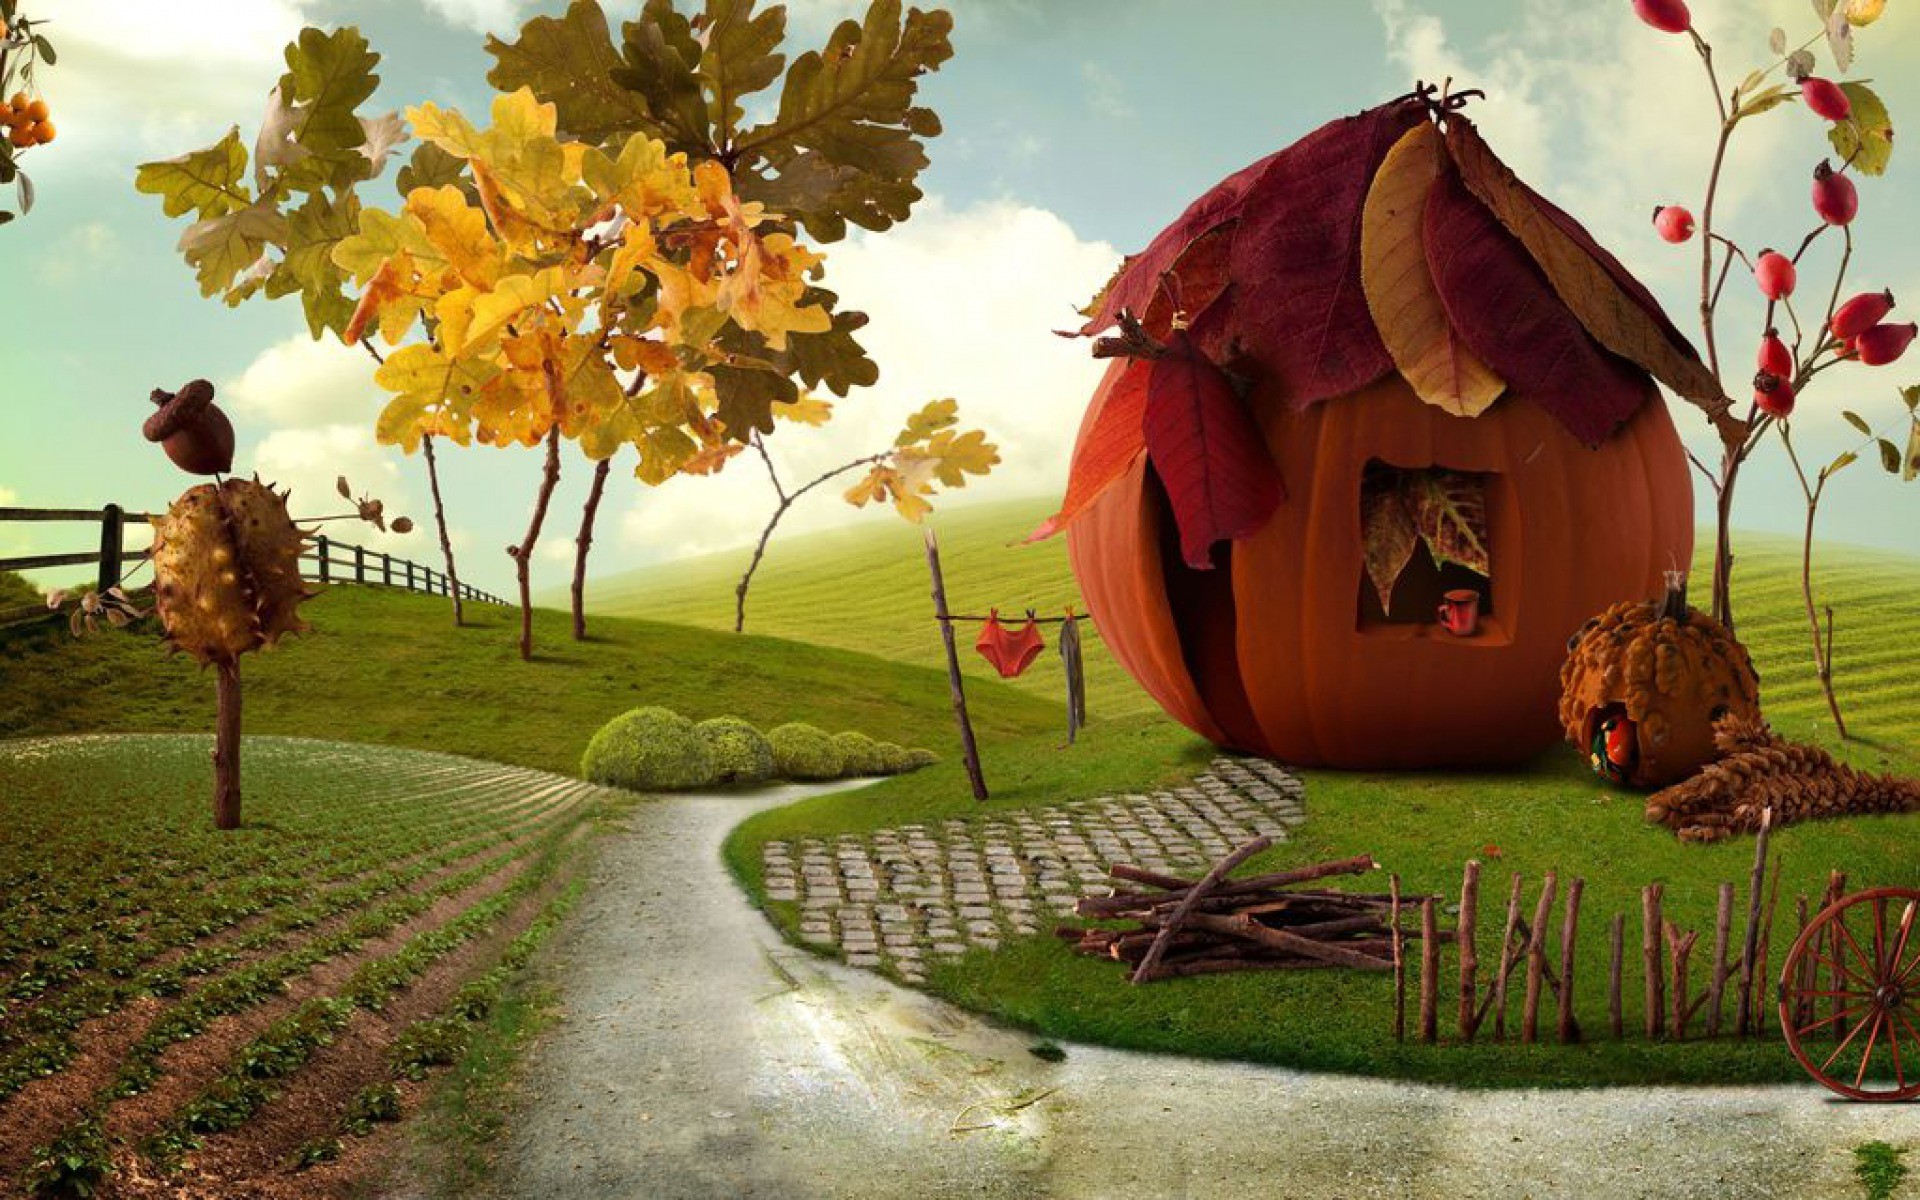 1920x1200 Imaginative Autumn Scenery wallpapers and stock photos